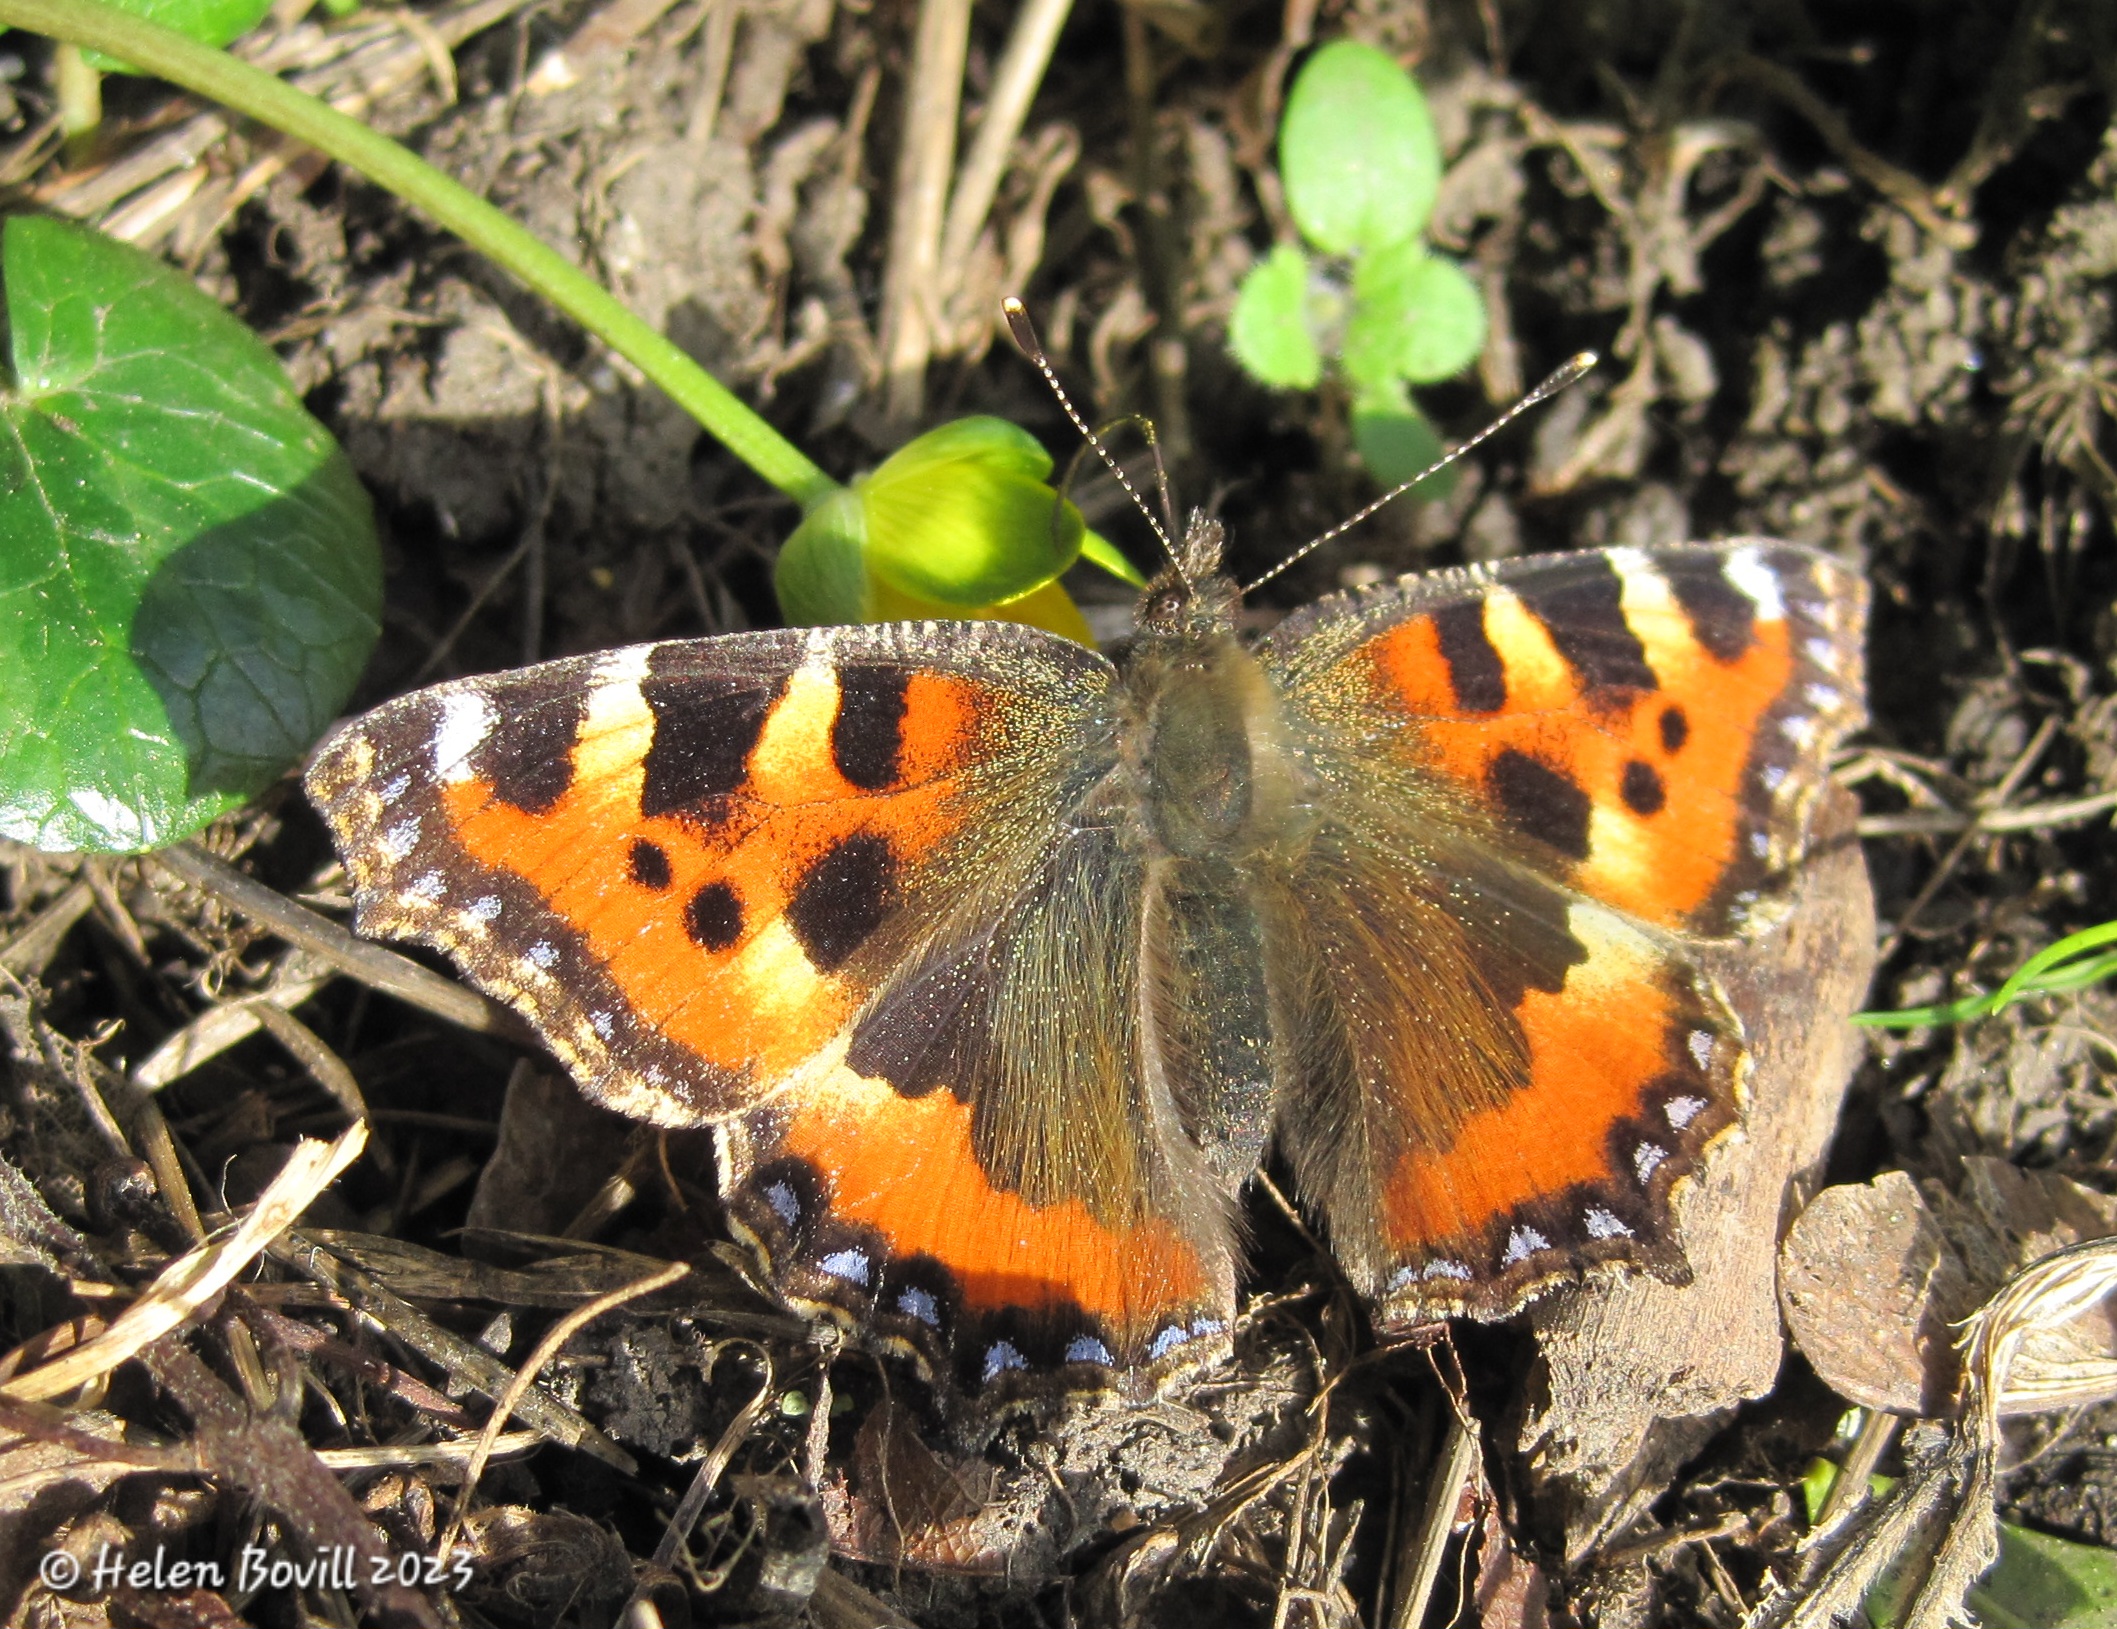 A Small Tortoiseshell butterfly seen on 21 February